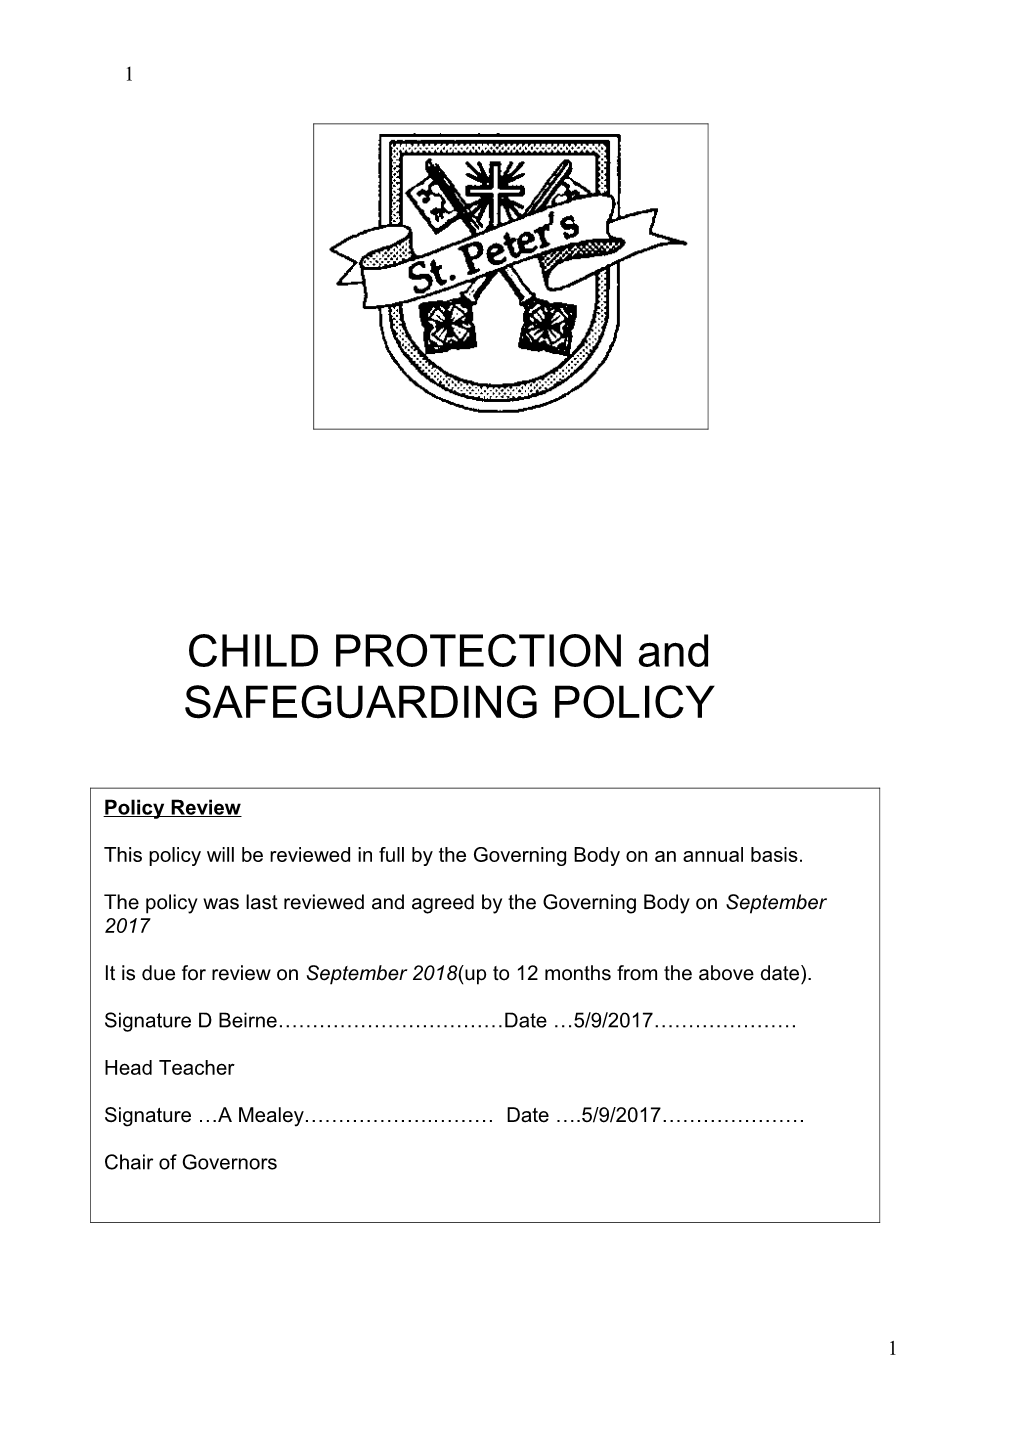 CHILD PROTECTION And